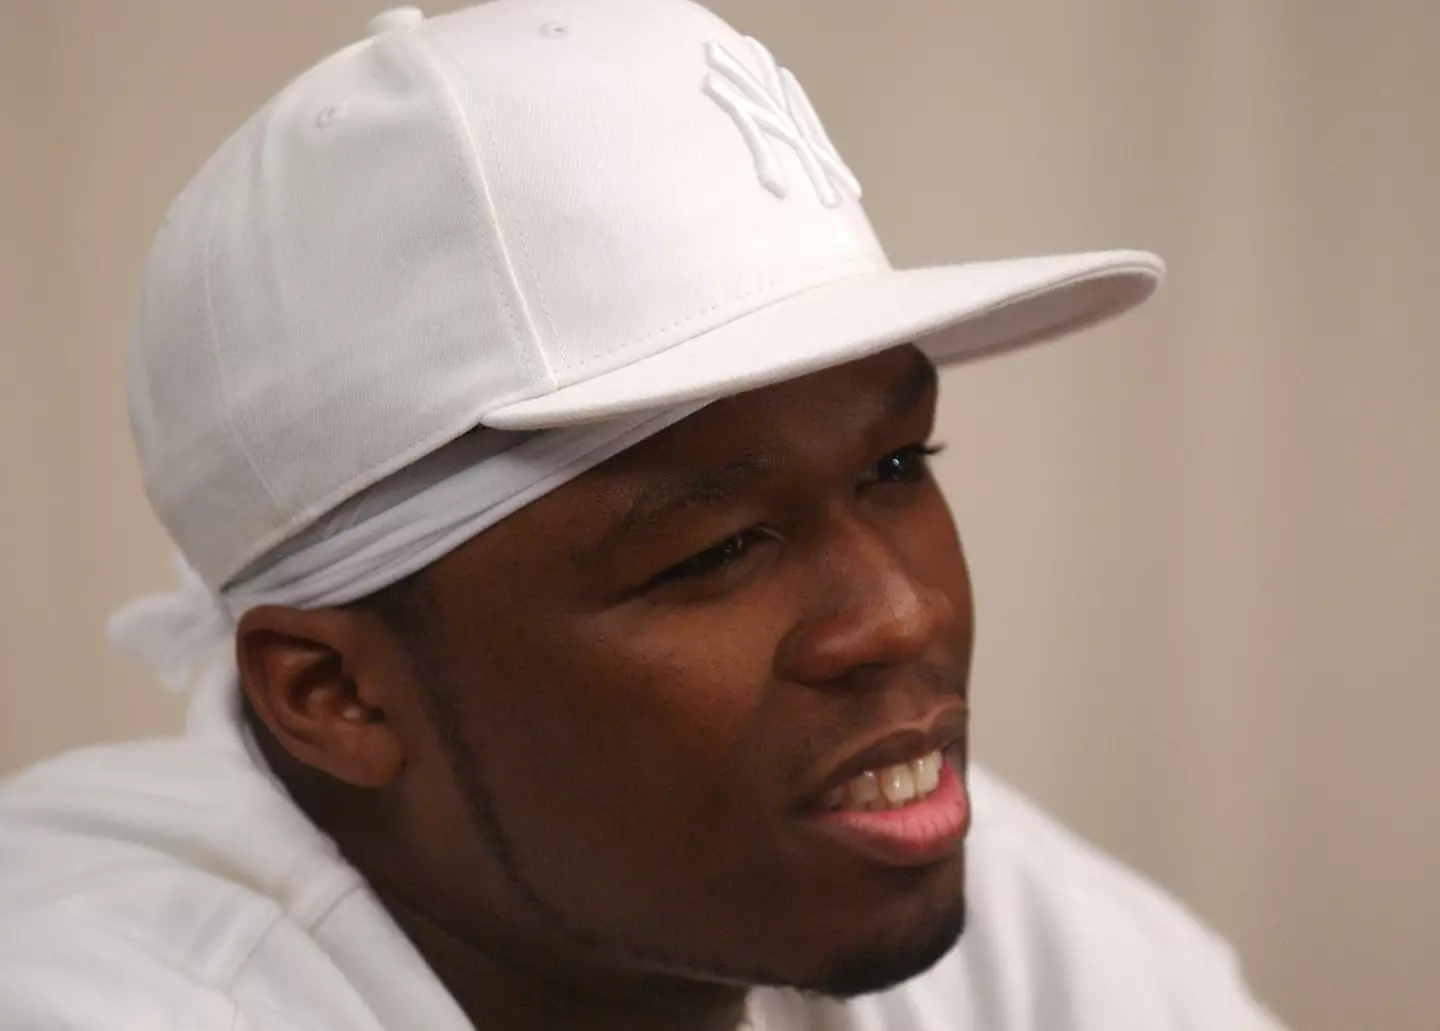 50 Cent may have spent $23 million on legal fees, but he's not crying about it because he's still a multimillionaire.